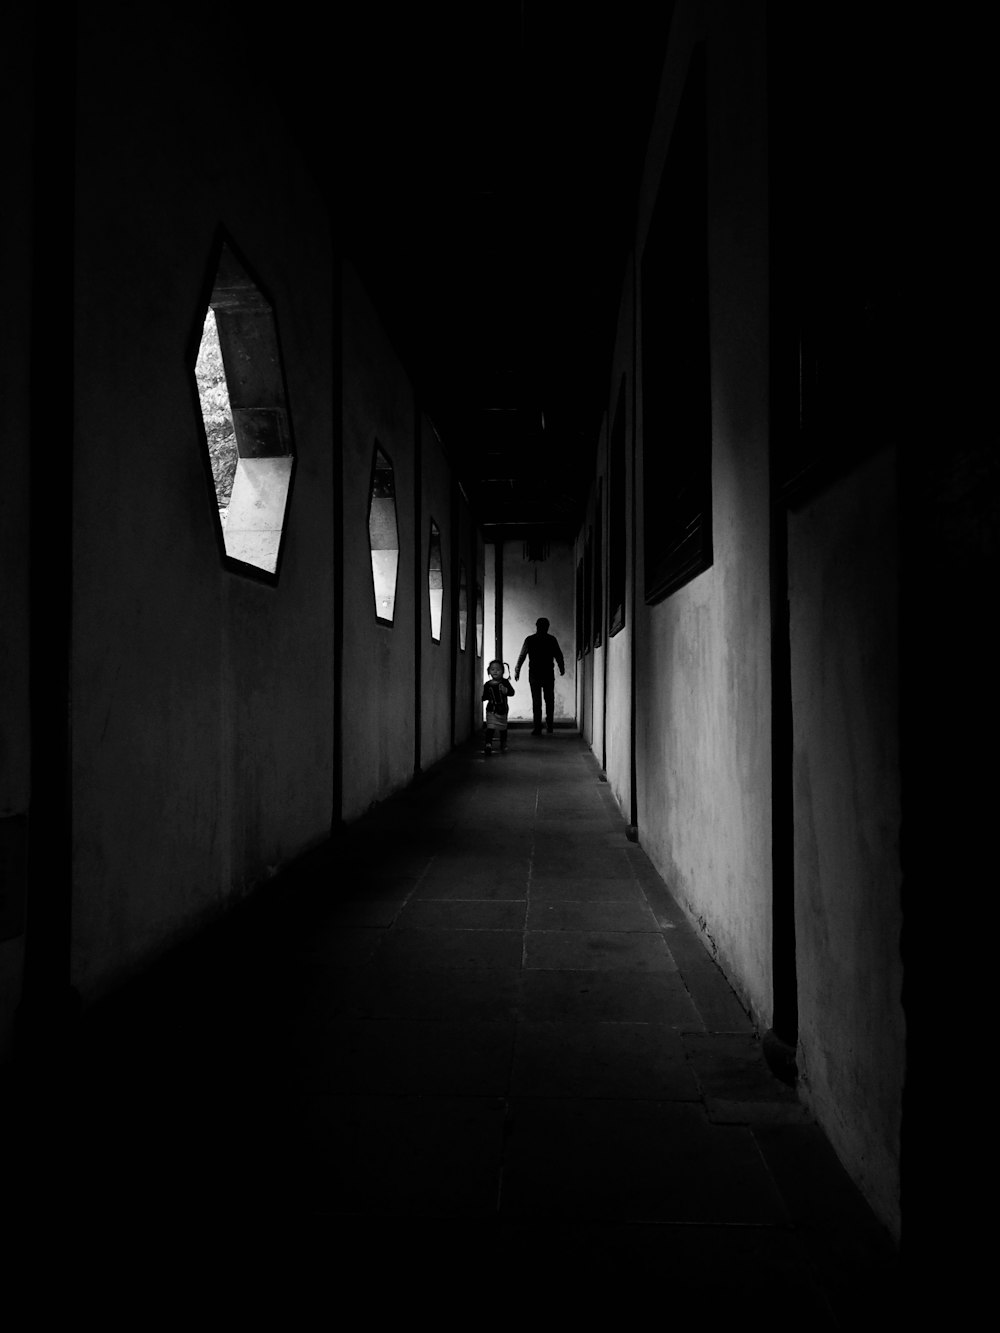 grayscale photography of two person walking on hallway